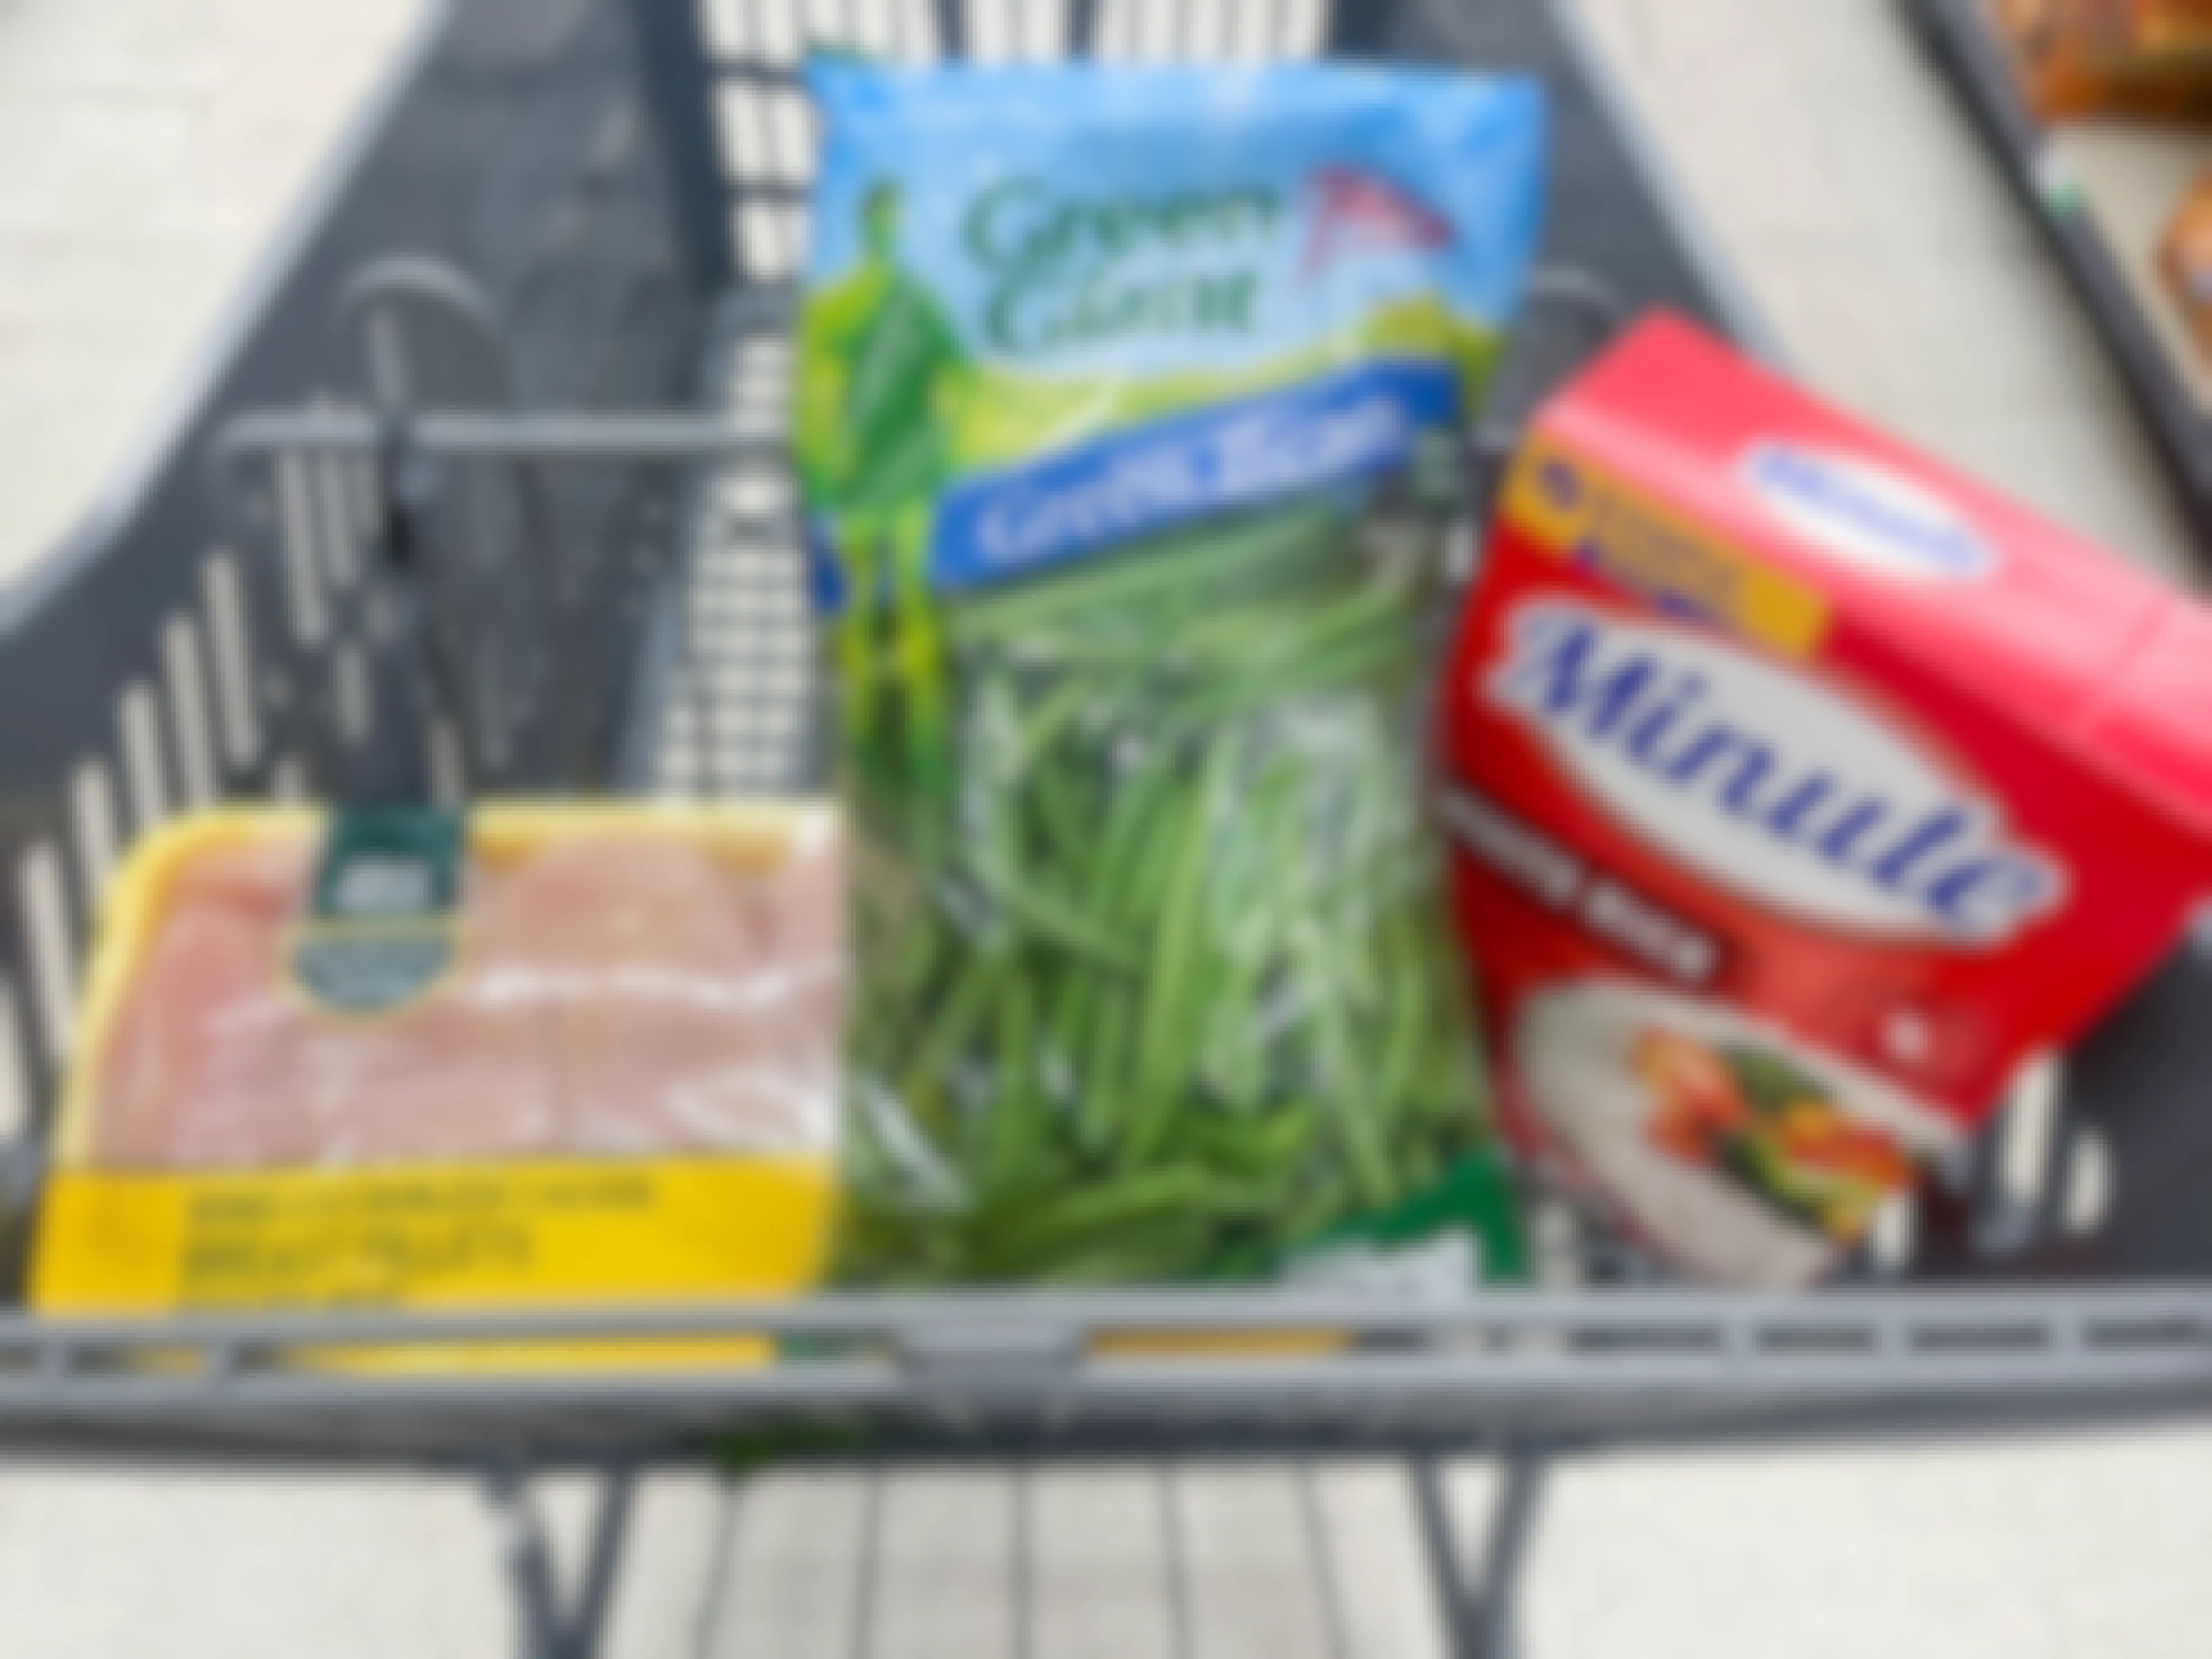 food in a shopping cart 